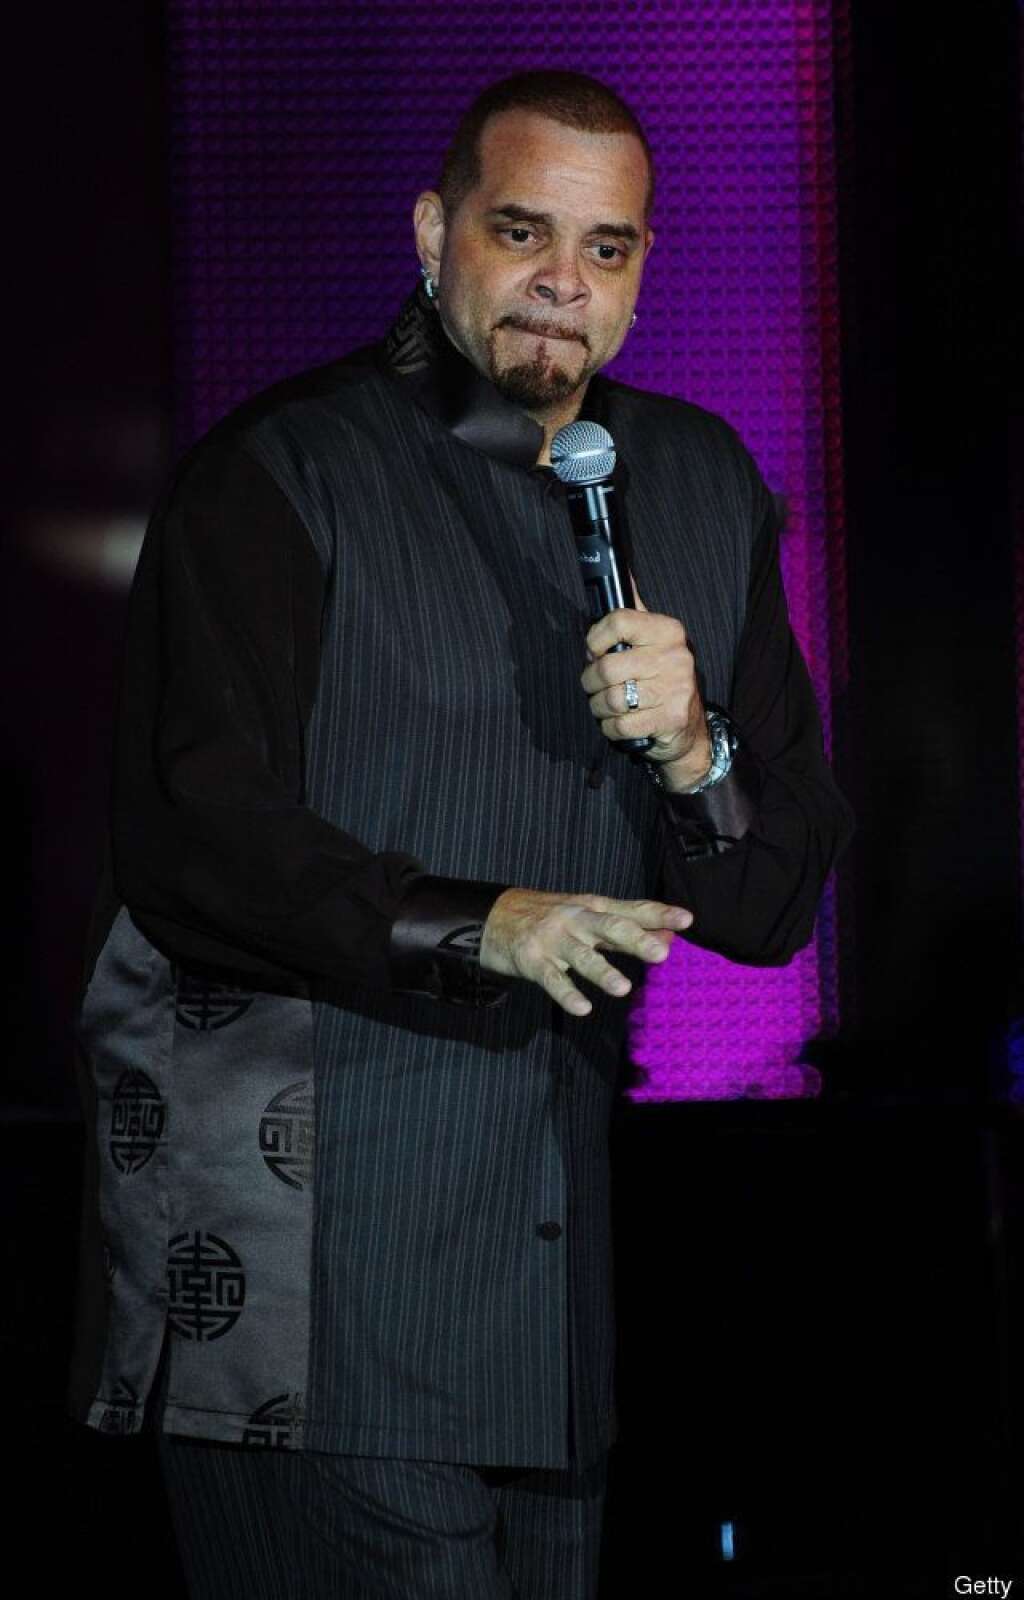 David "Sinbad" Adkins - <a href="http://realestate.aol.com/blog/2010/02/14/feeling-heat-from-irs-sinbad-will-sell-la-home/" target="_hplink">According to AOL Real Estate</a>, Sinbad was said to owe $8.5 million to the IRS in 2010 and another $2.1 million to the state of California that year. Sinbad was named as <a href="http://www.huffingtonpost.com/2009/04/12/sinbad-taxes-embarrassmen_n_185976.html" target="_hplink">one of the state's biggest tax evaders</a> in 2009.